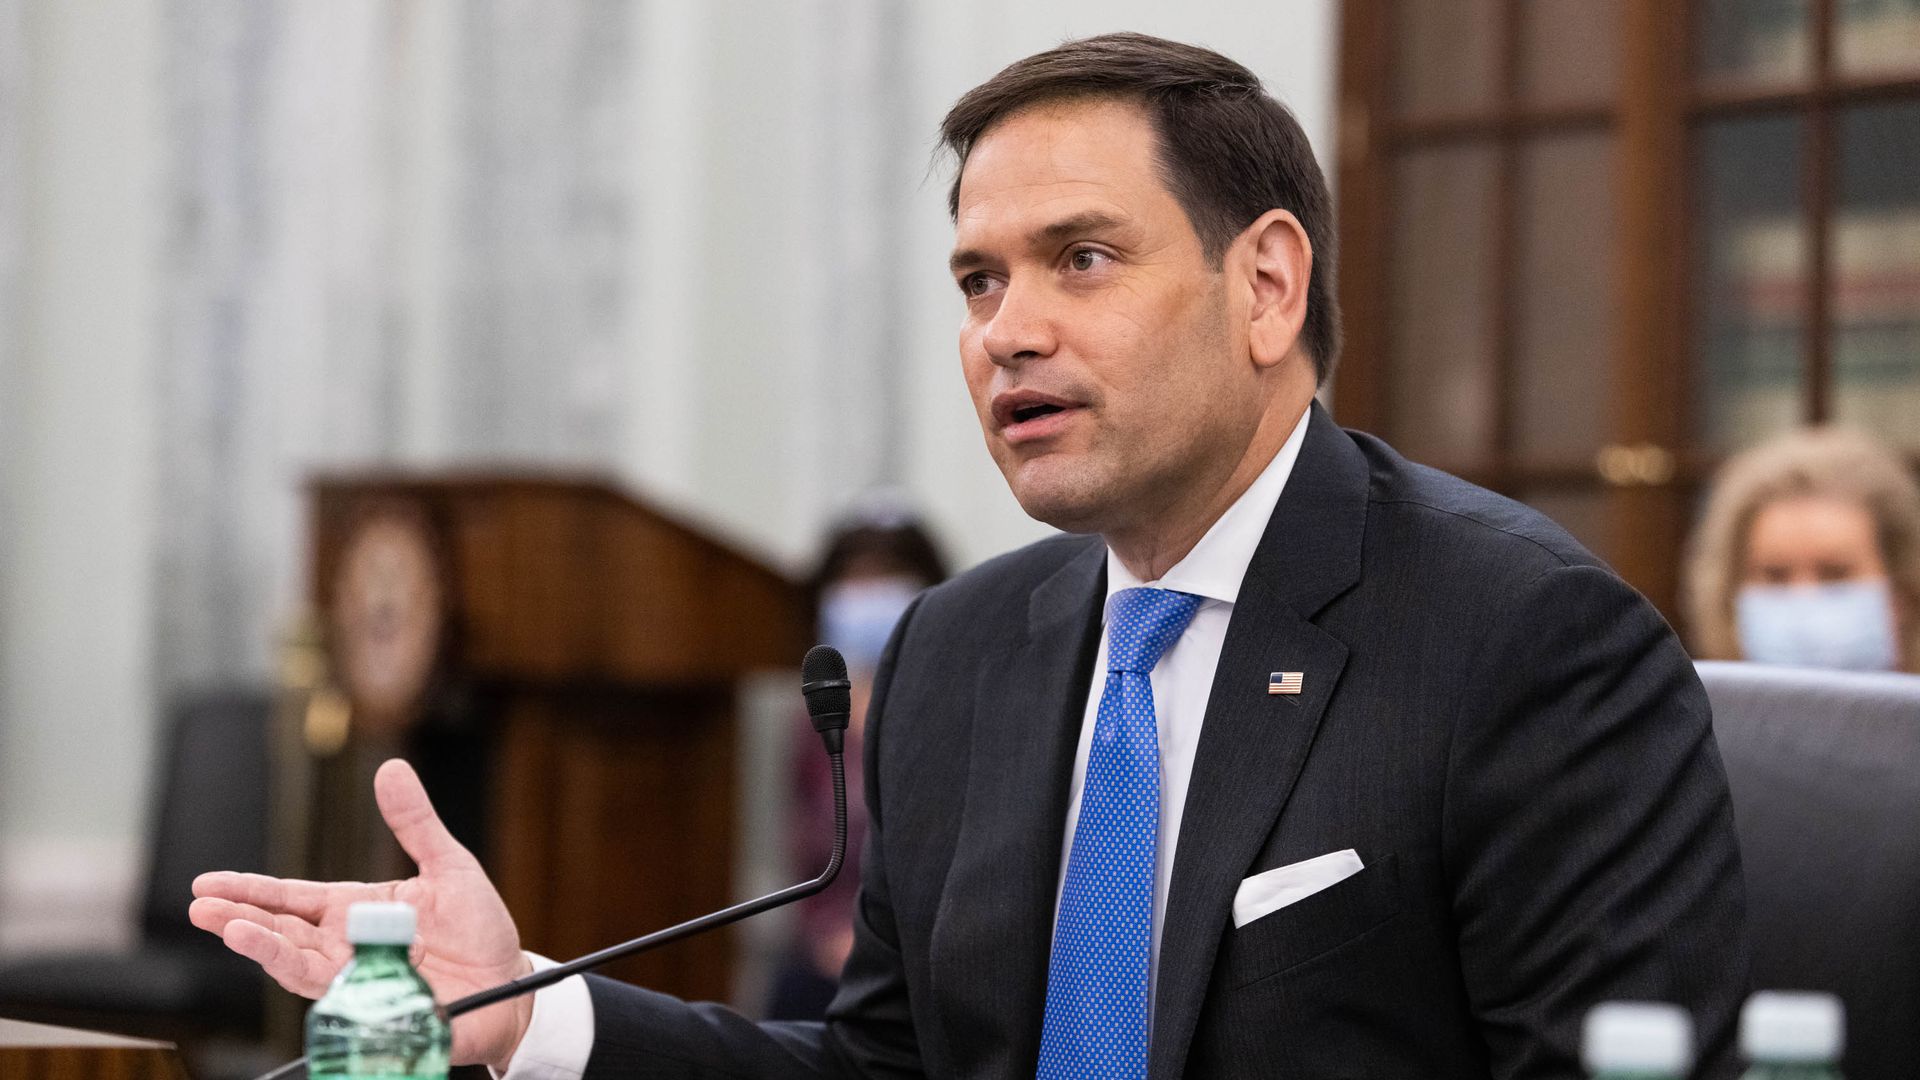 Senator Marco Rubio, R-FL, speaks during a Senate Commerce, Science, and Transportation Committee hearing 